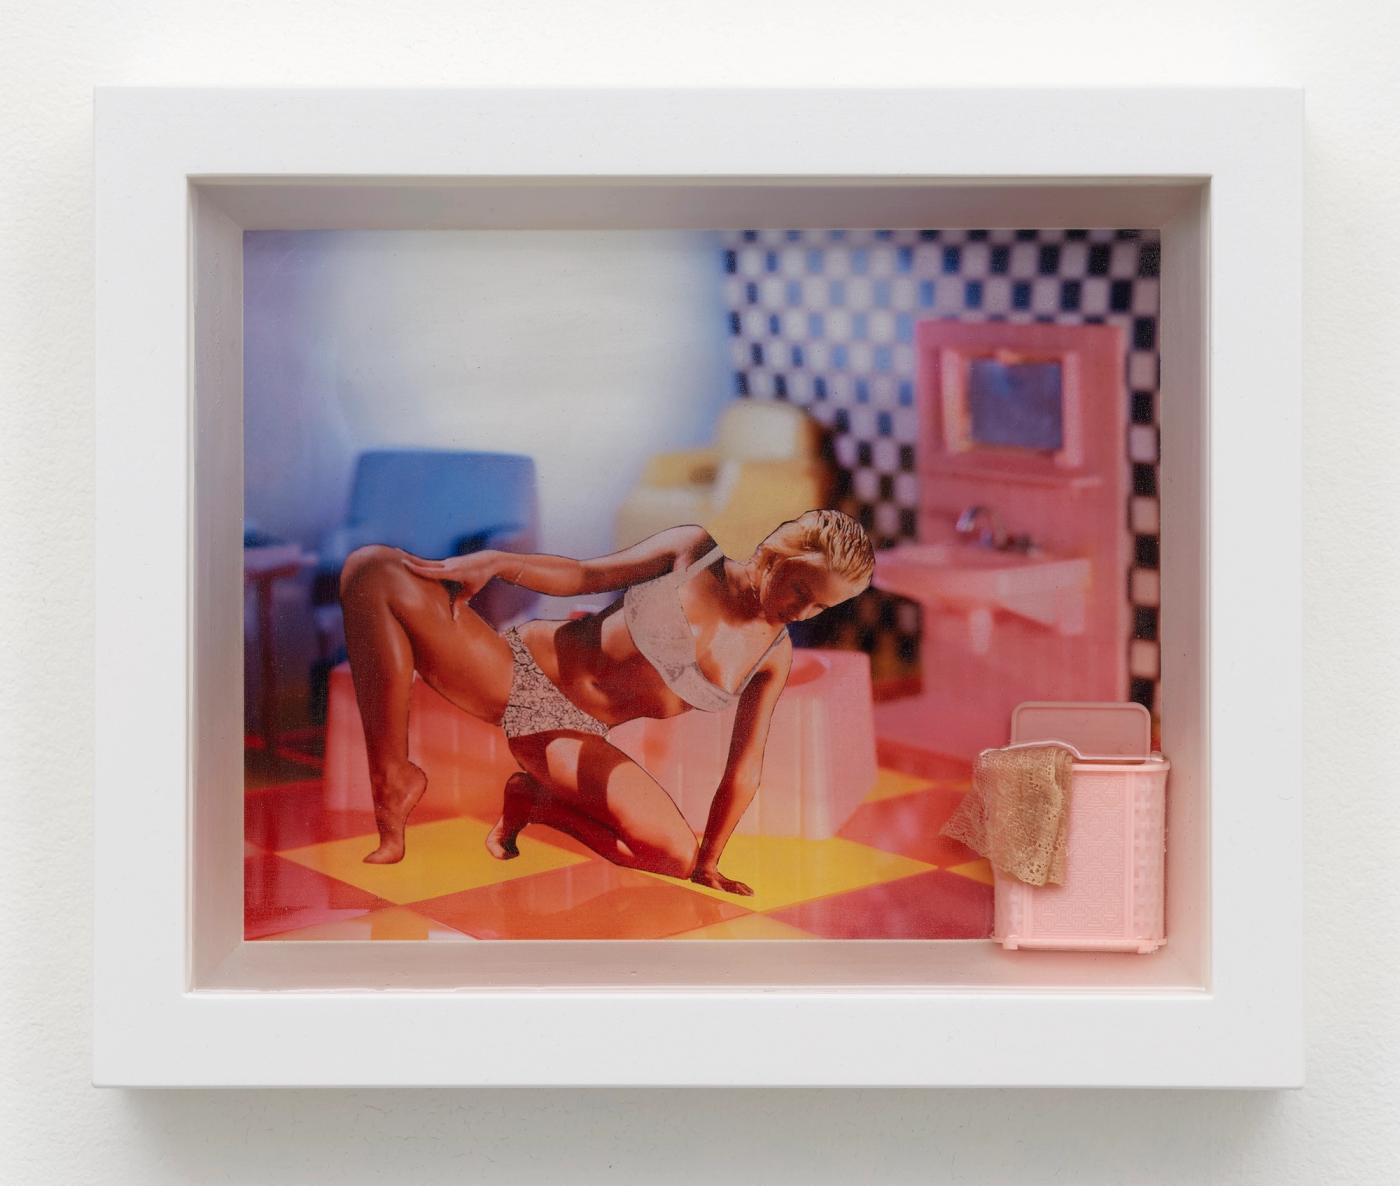 Image of Color Pictures/Deep Photos (Girl in Bra/Checkered Wall/Sink/Hamper), 2022: Ink jet, plastic, resin, fabric, wood